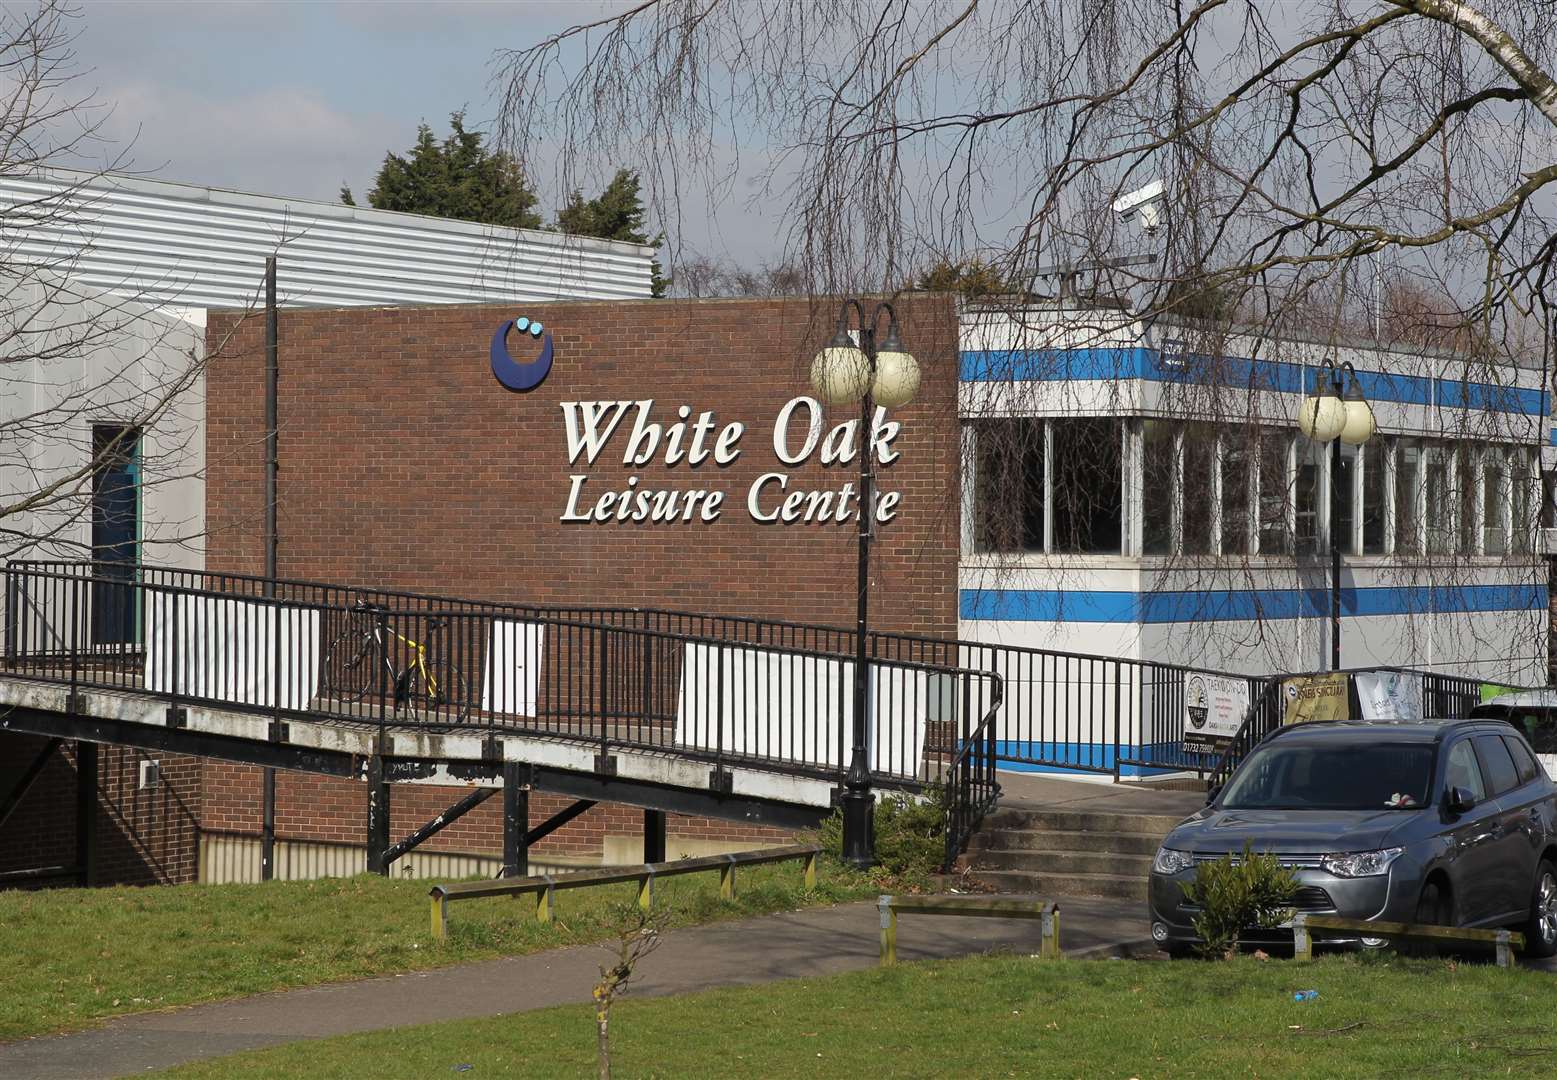 The former facilities at the White Oak Leisure Centre in Swanley which residents had campaigned to save. Picture: John Westhrop